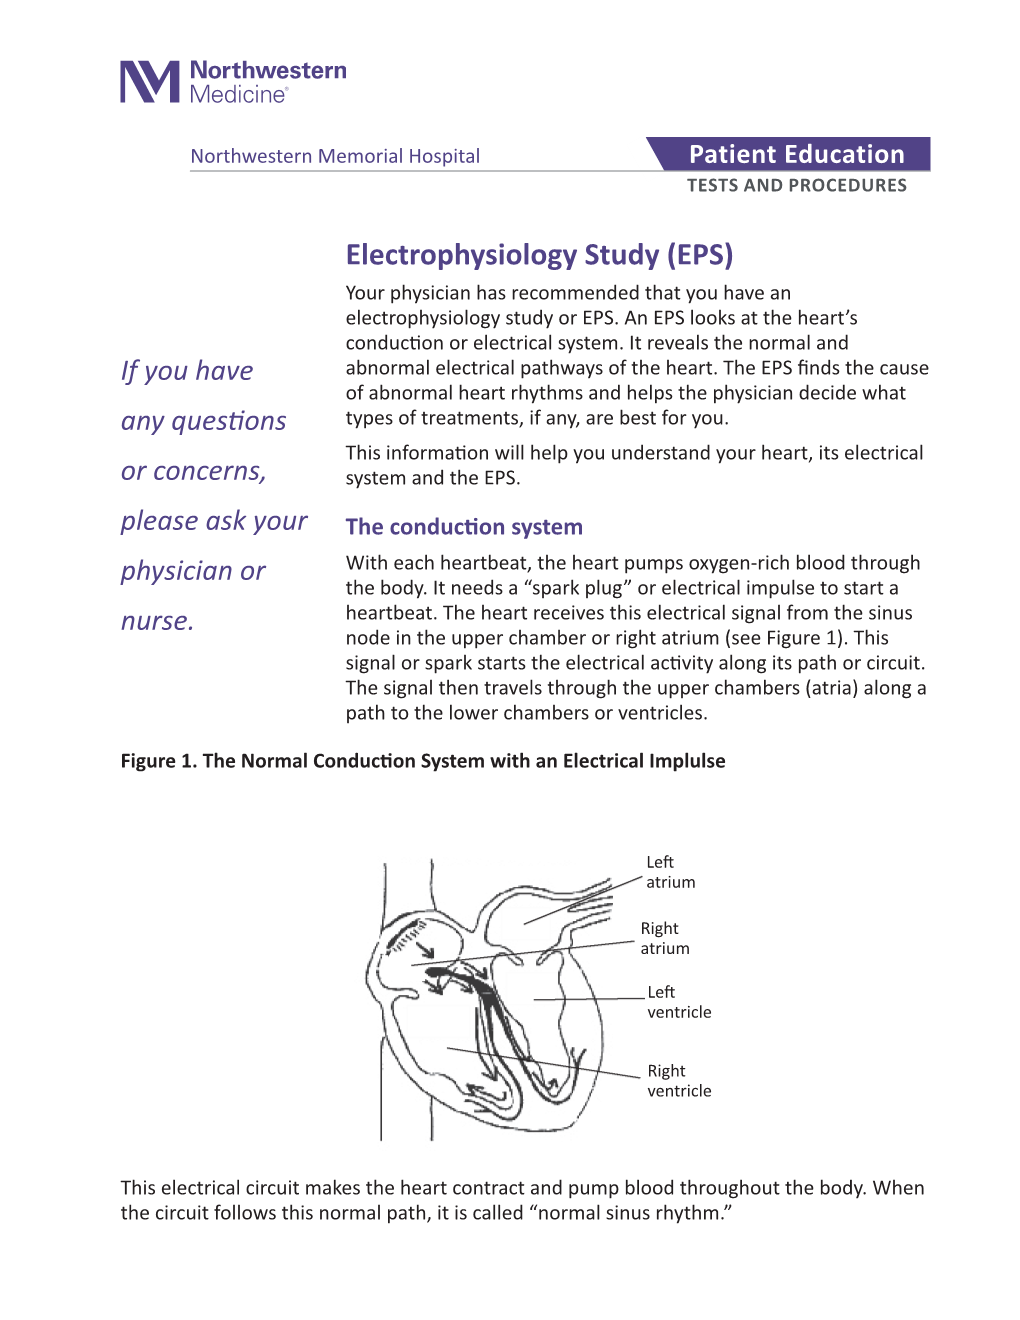 Electrophysiology Study (EPS) Your Physician Has Recommended That You Have an Electrophysiology Study Or EPS